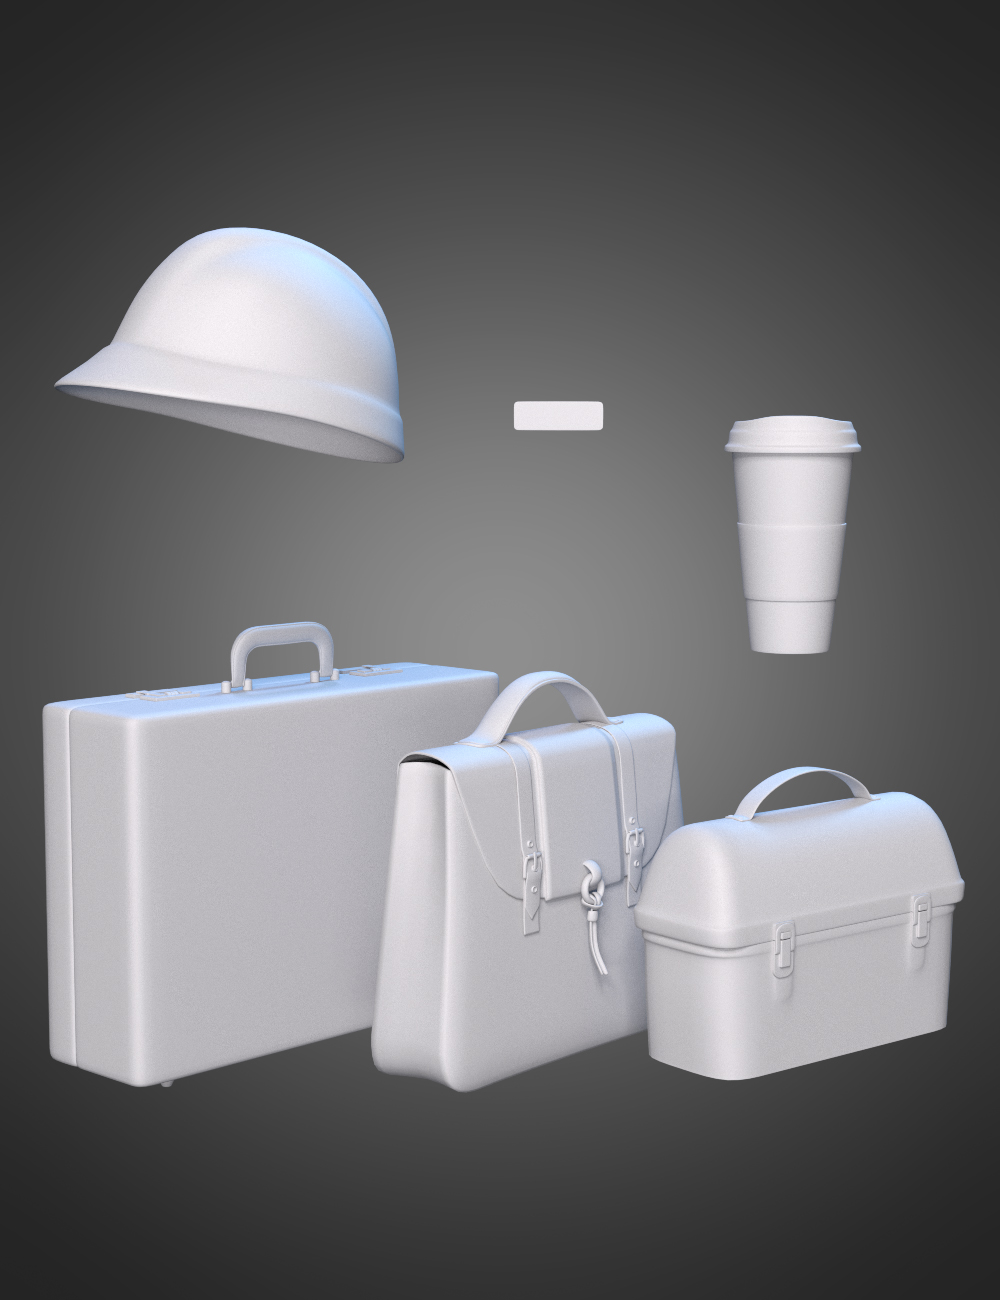 Going to Work Props for Genesis 8 and 8.1 by: Nikisatez, 3D Models by Daz 3D